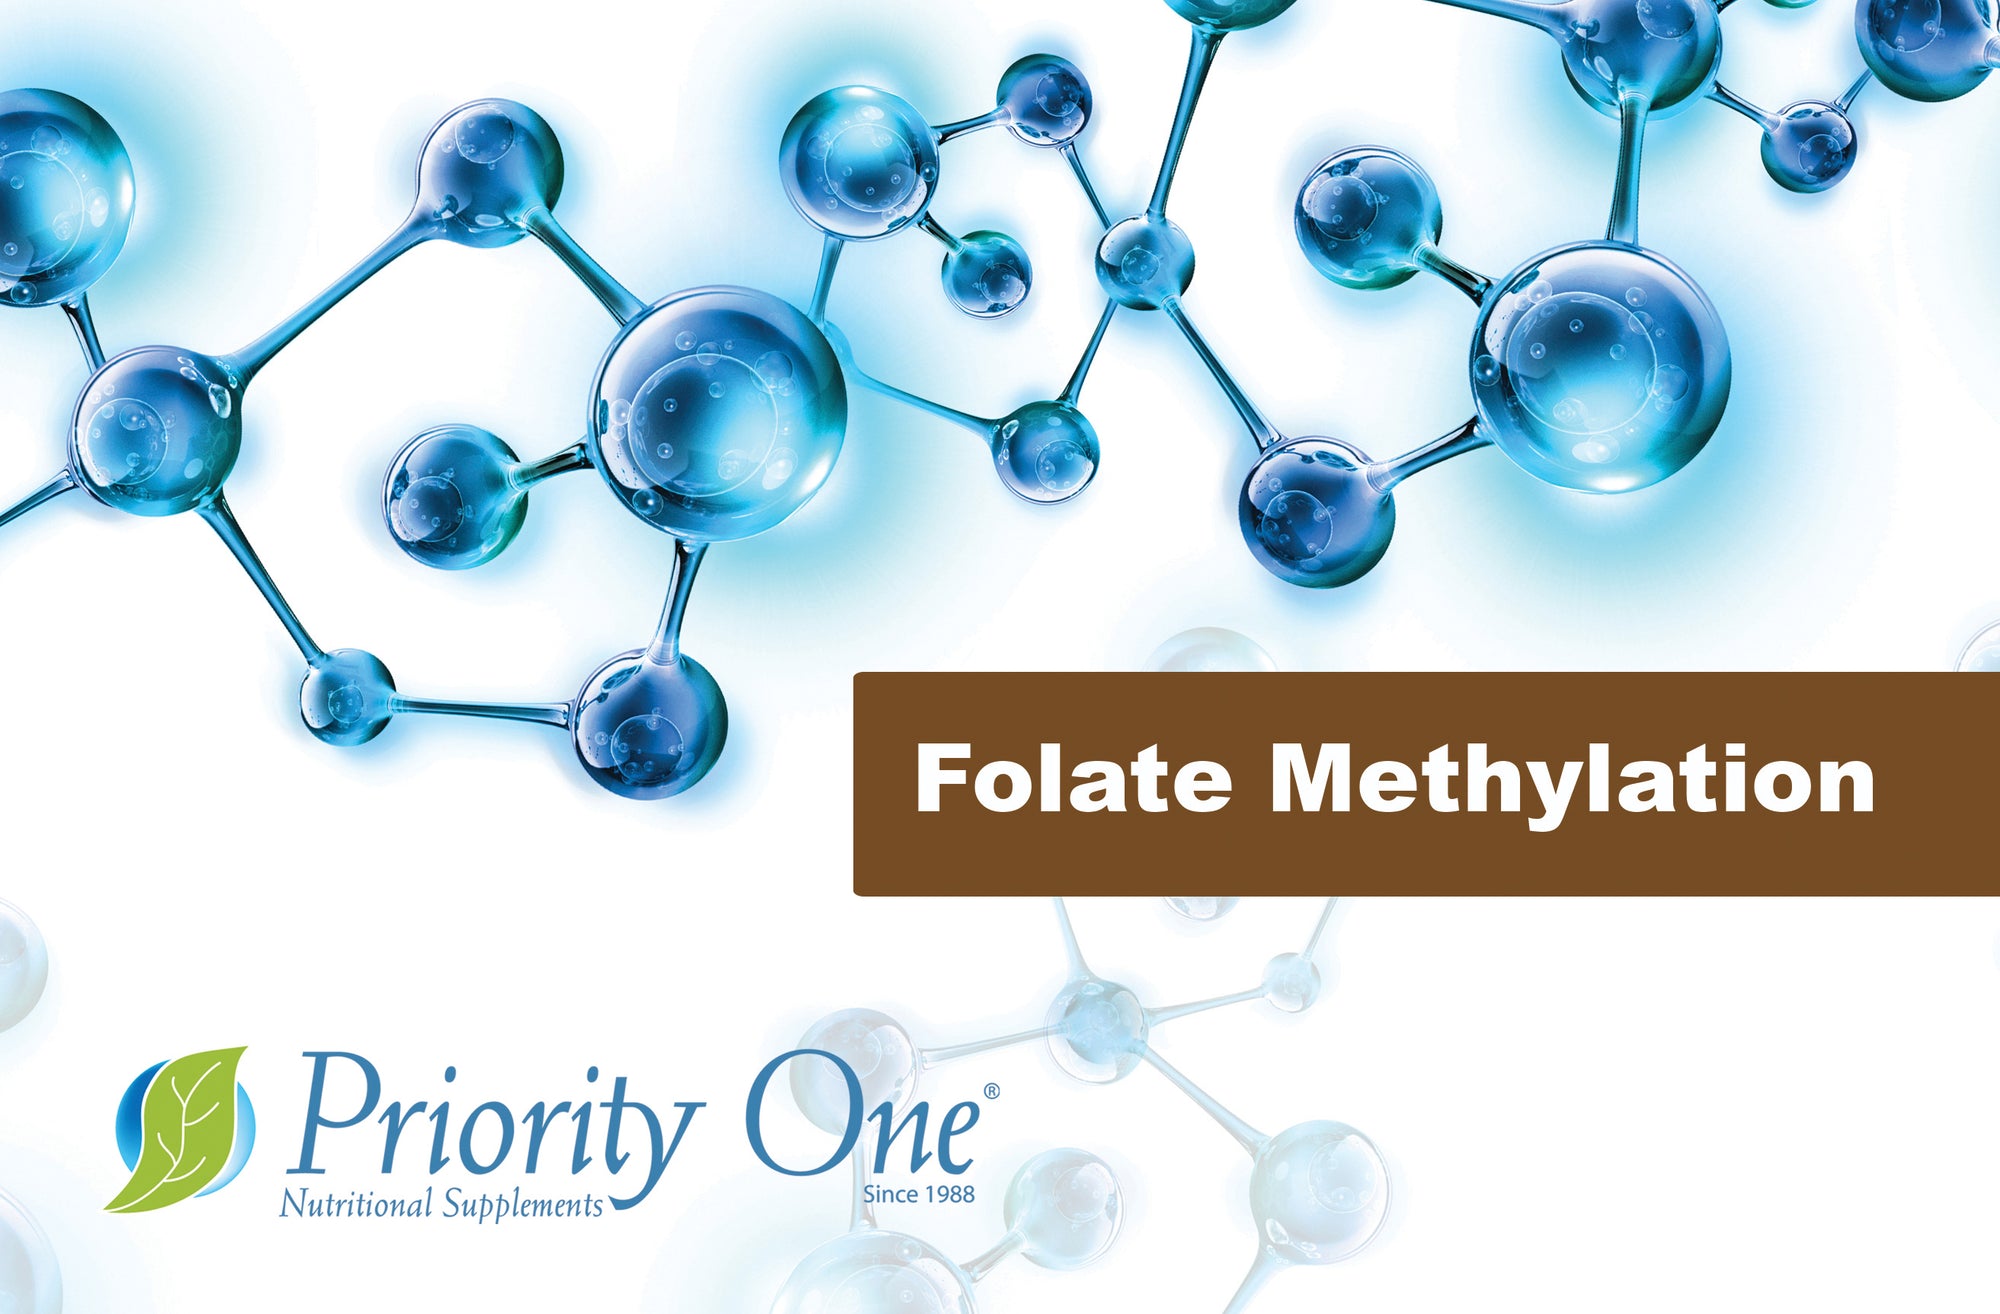 Folate Methylation is designed to synergistically support the methylation process and normal homocysteine metabolism.